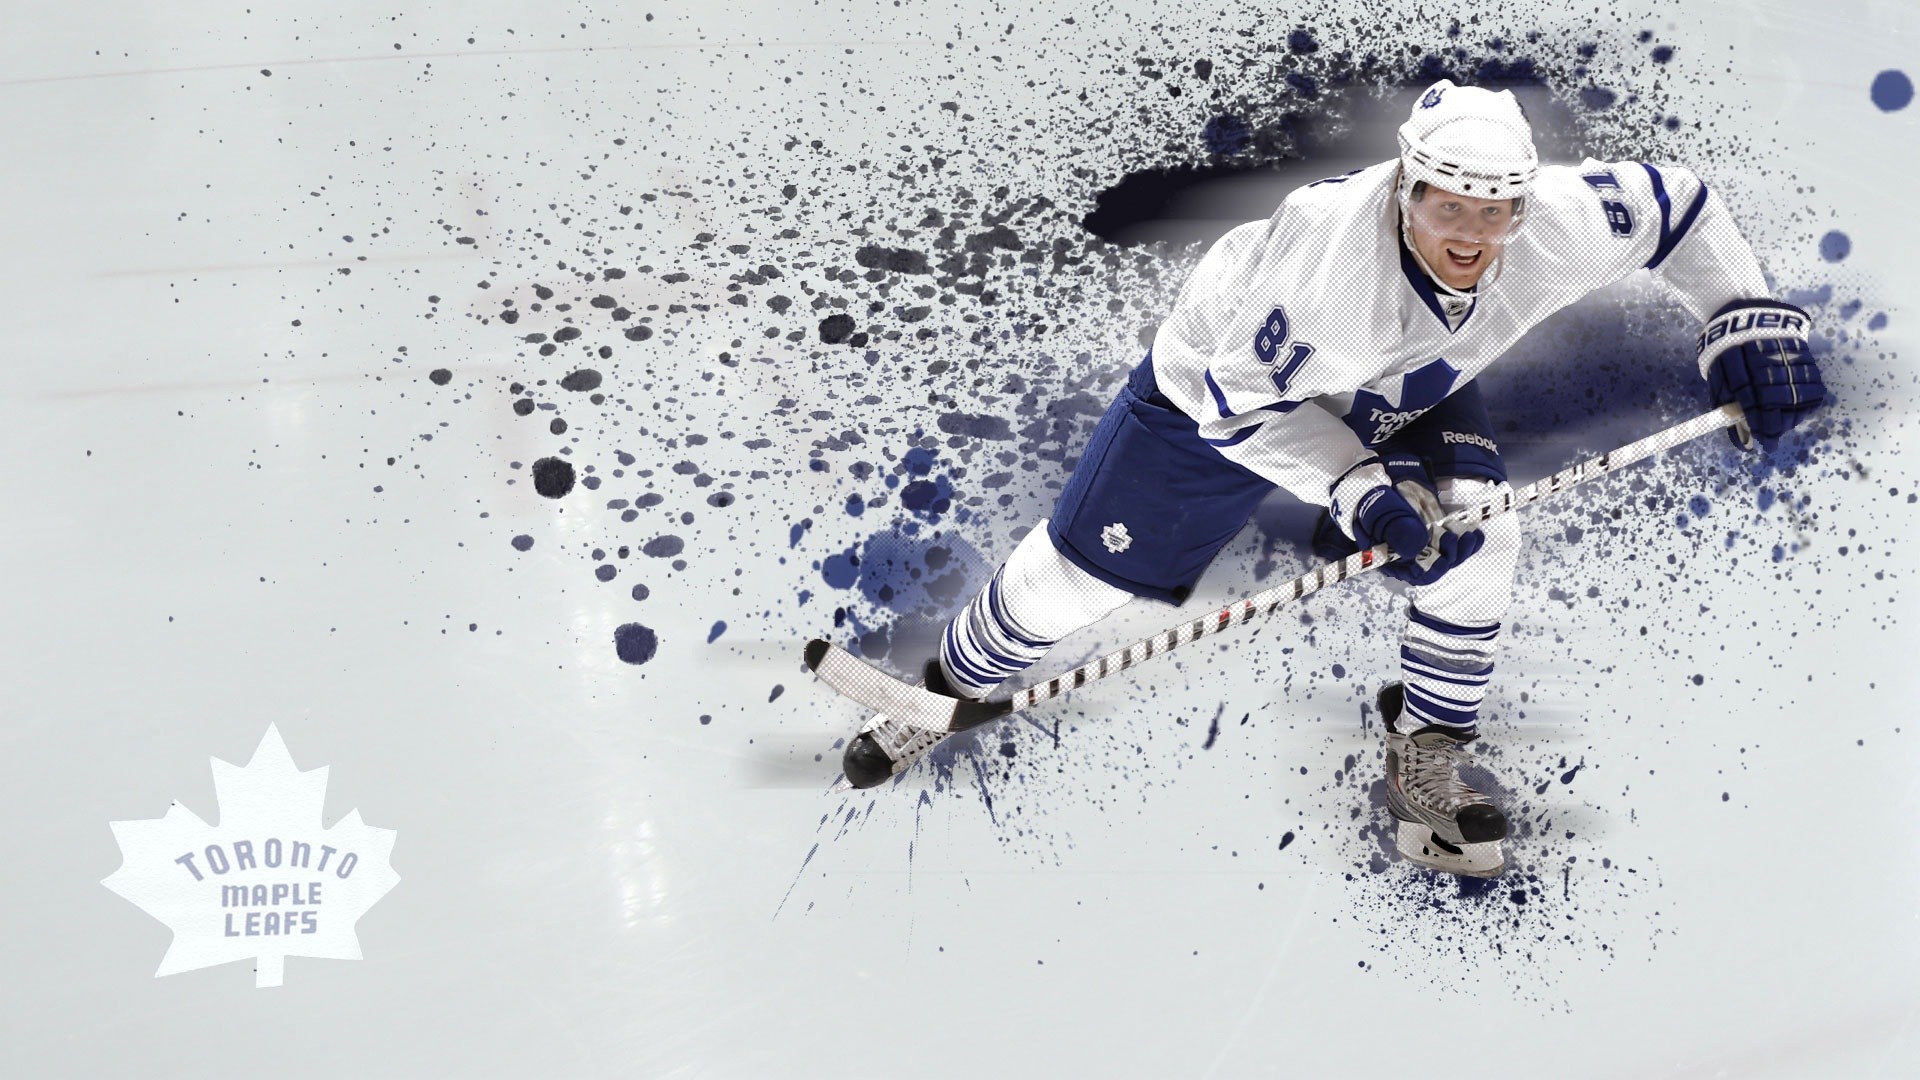 Nhl hockey wallpaper pictures